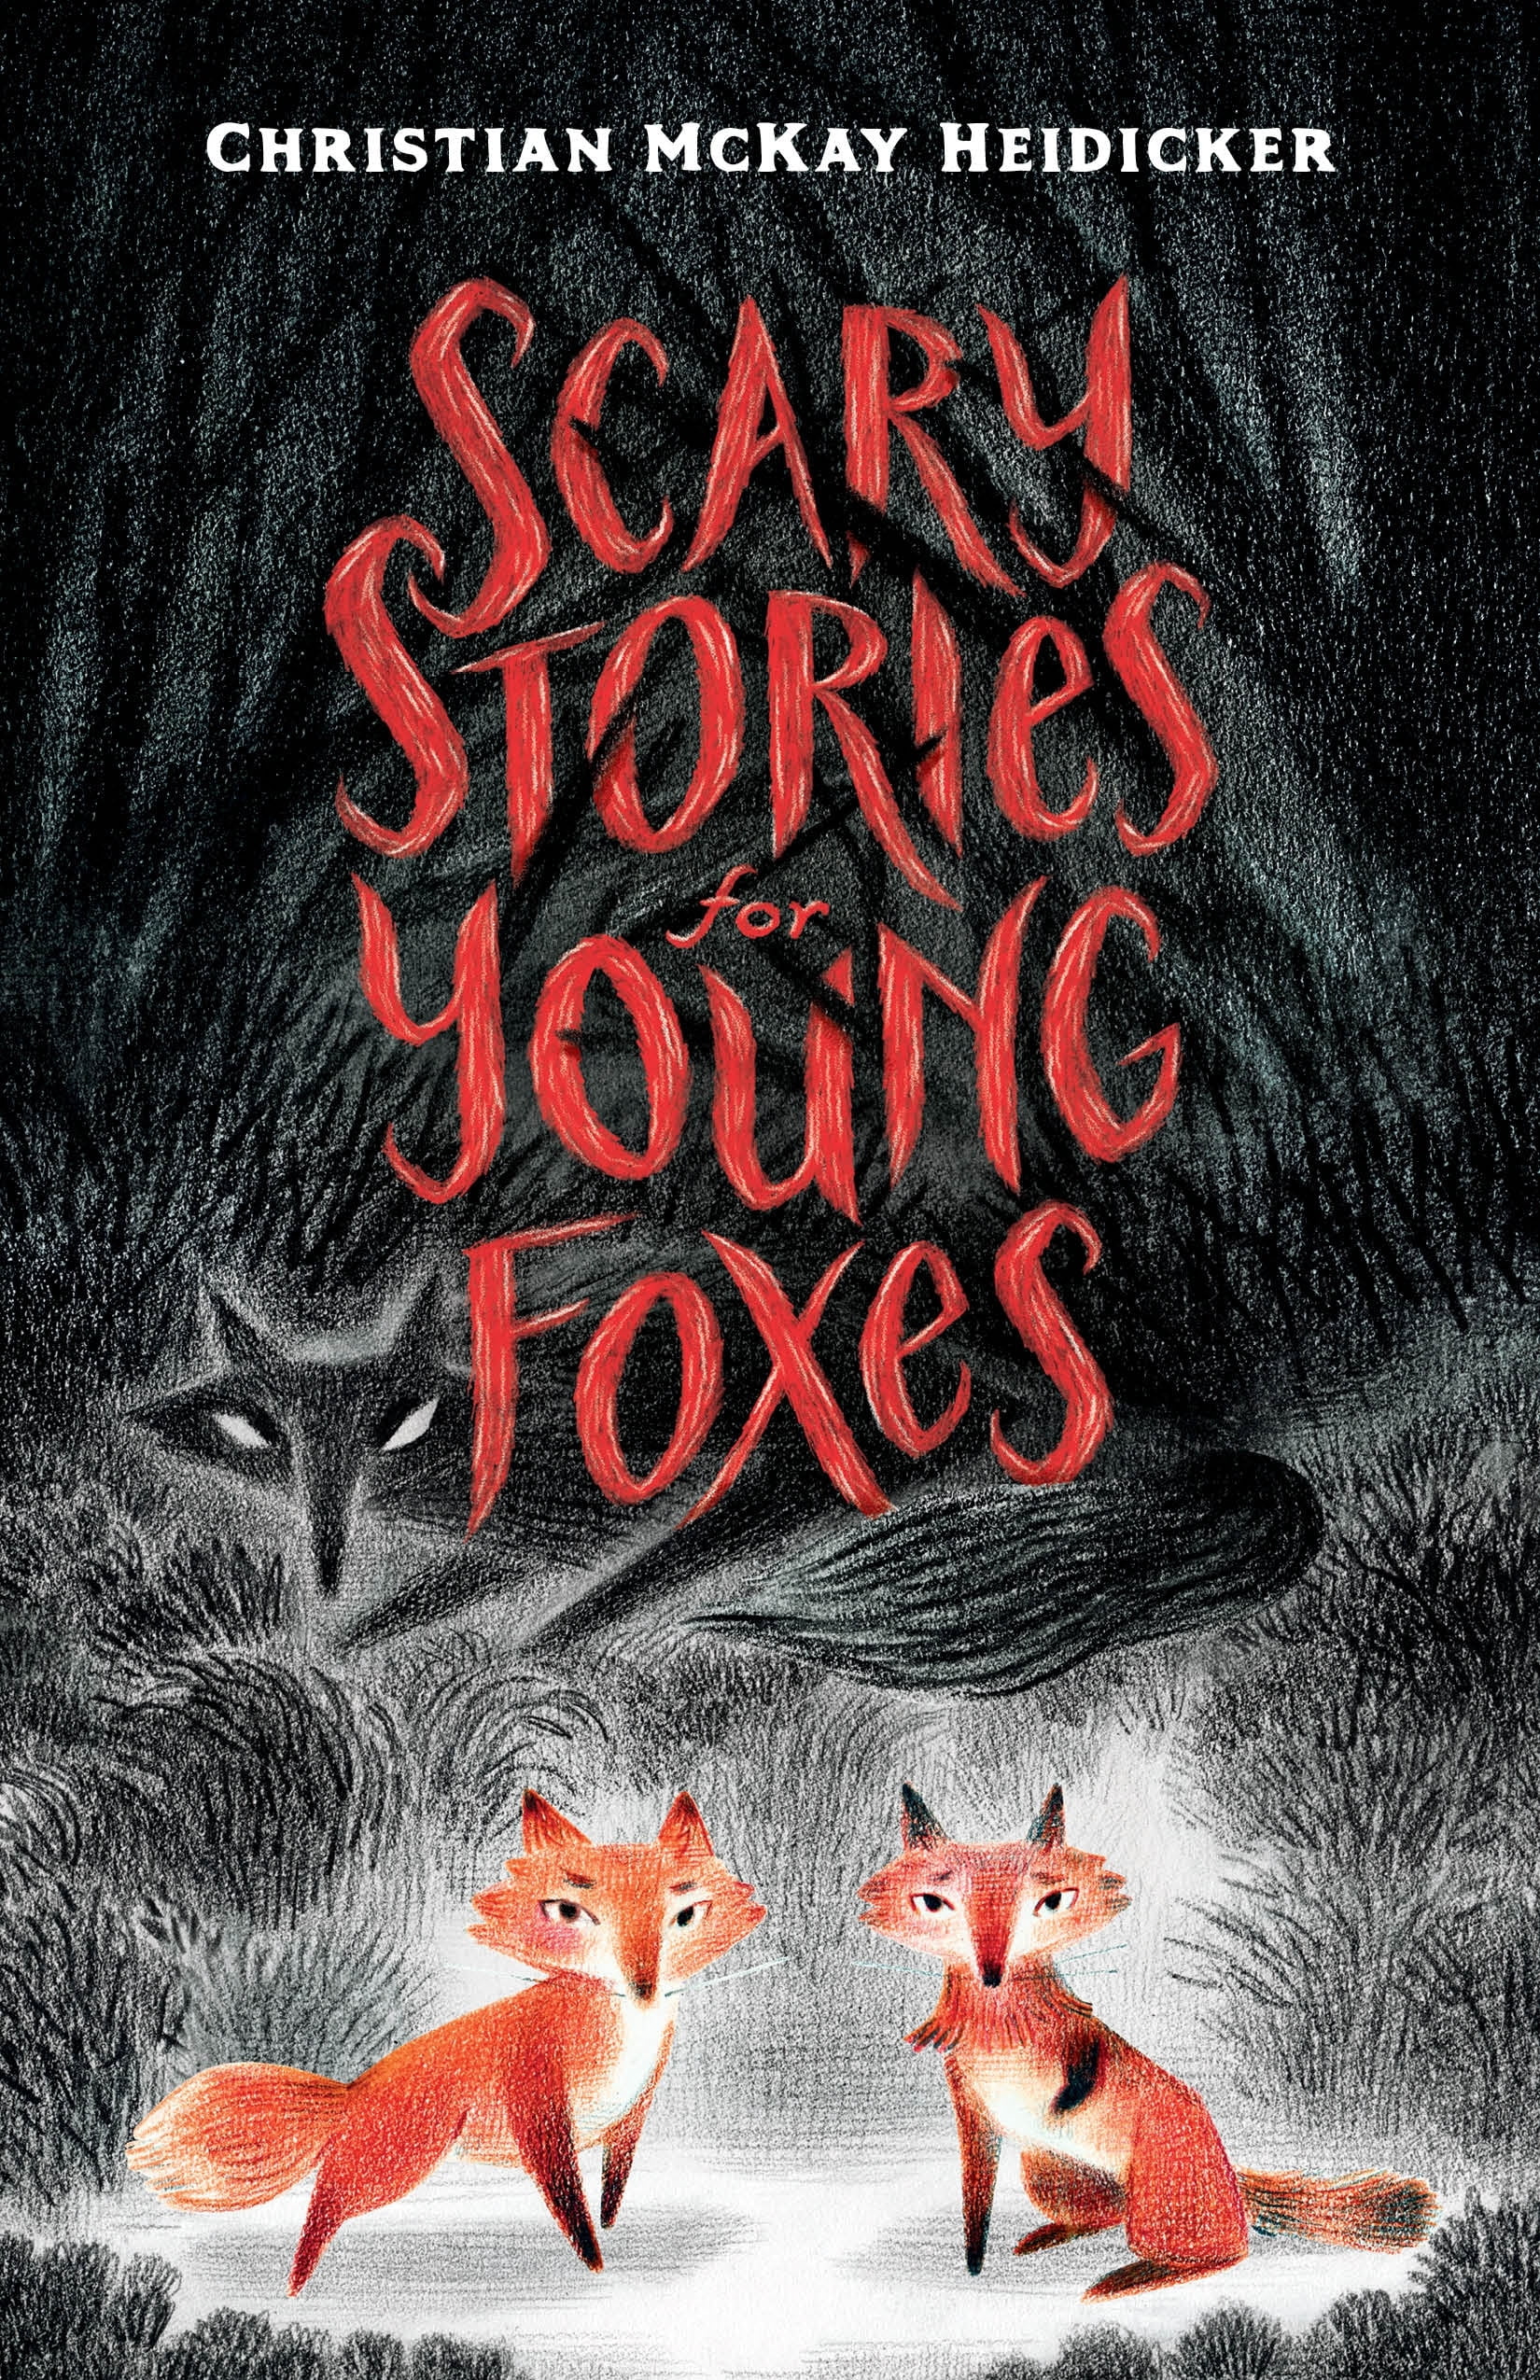 Scary Stories for Young Foxes - Walmart.com - Walmart.com